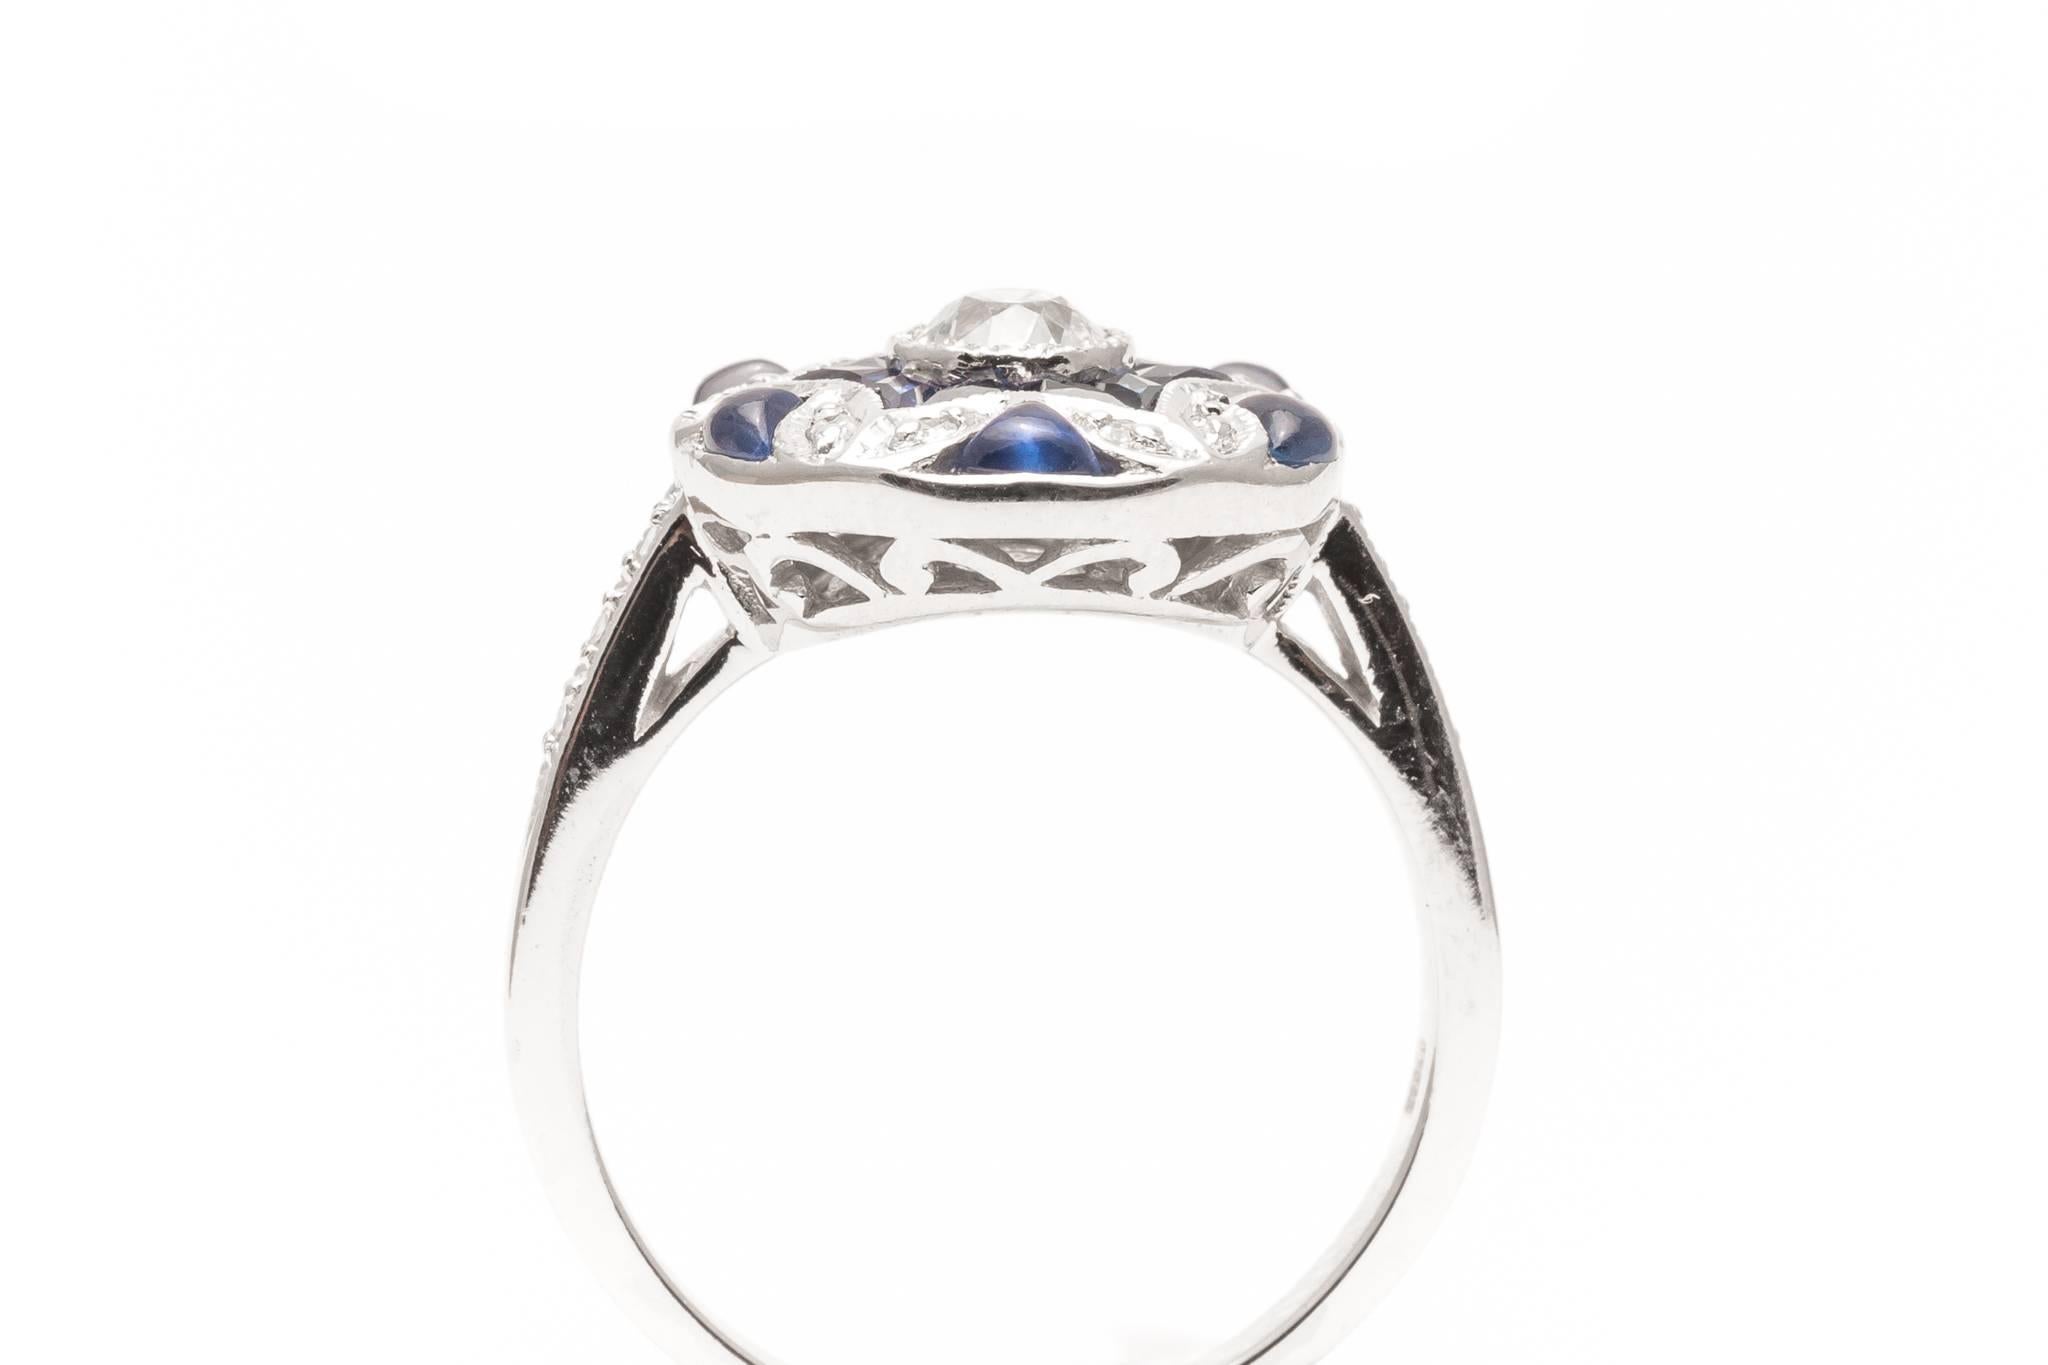 Exquisite Diamond and French Cut Sapphire White Gold Ring 1